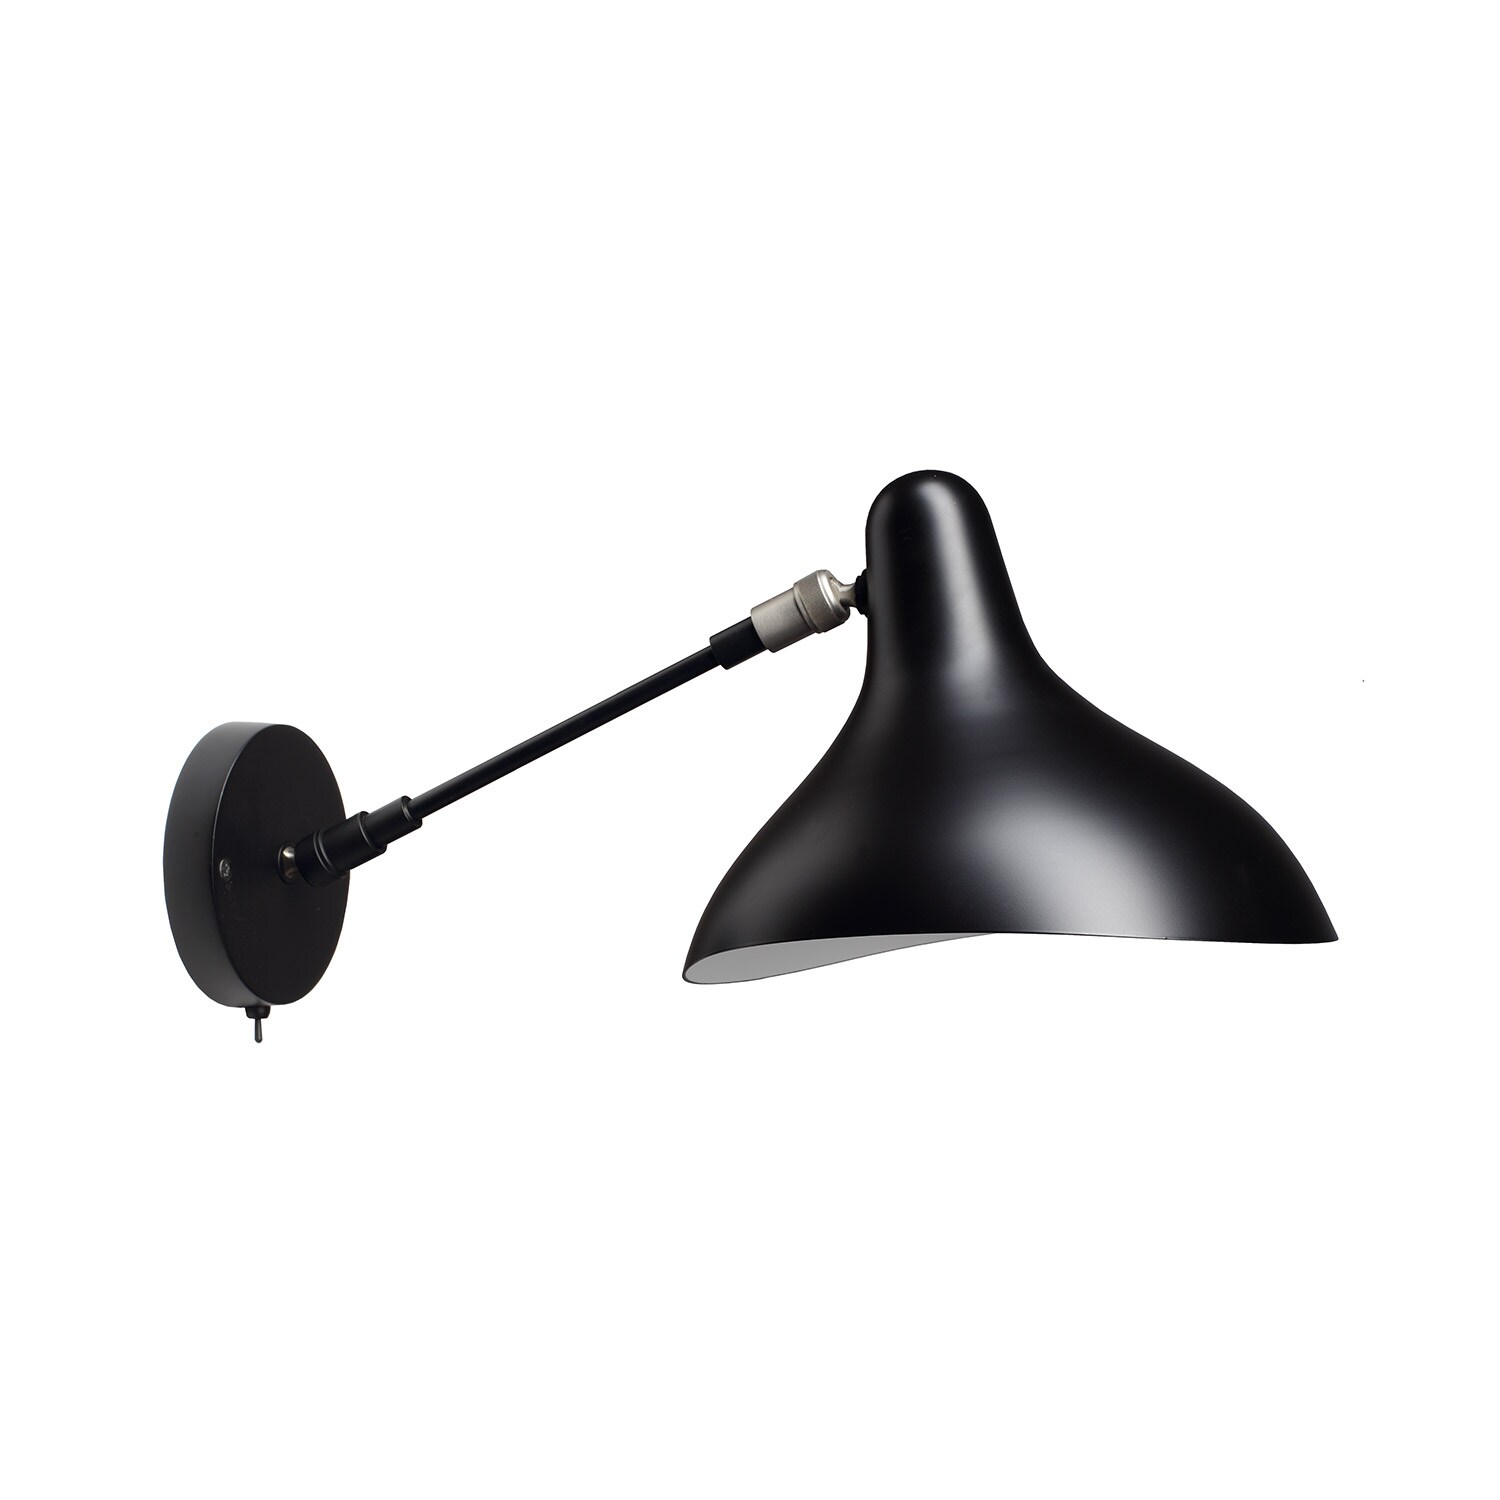 Raap bladeren op alledaags Productie Mantis BS5 Wall Lamp With Switch - DCWéditions @ RoyalDesign